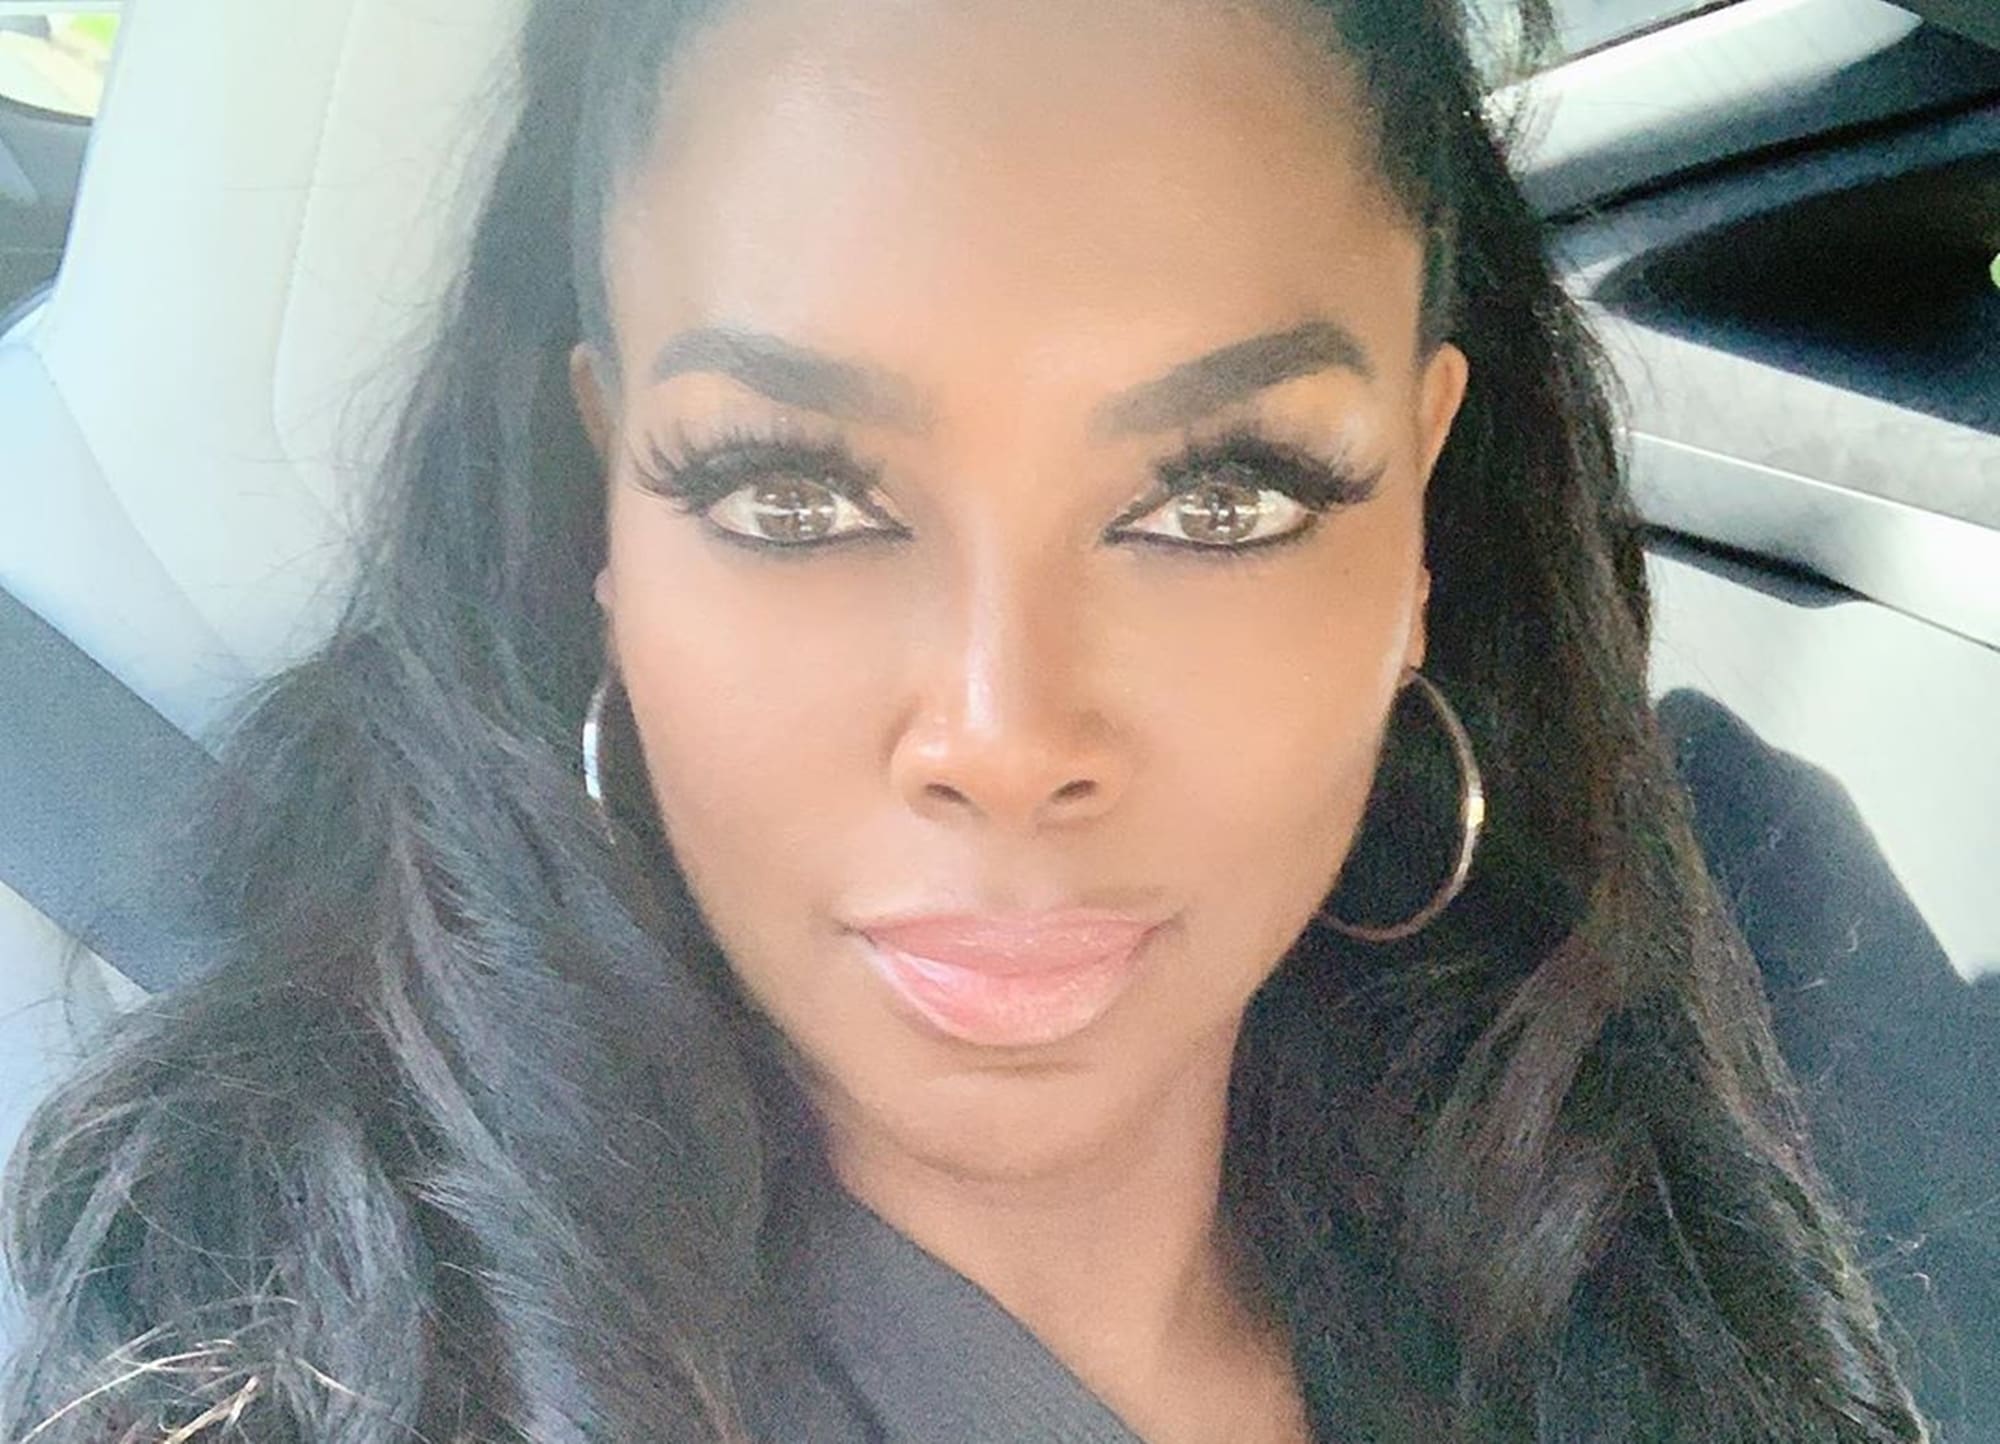 Kenya Moore Shocks Fans With A Footage Featuring An Accident Near Her Home - She And Brooklyn Daly Could Have Been Hit By Tragedy!